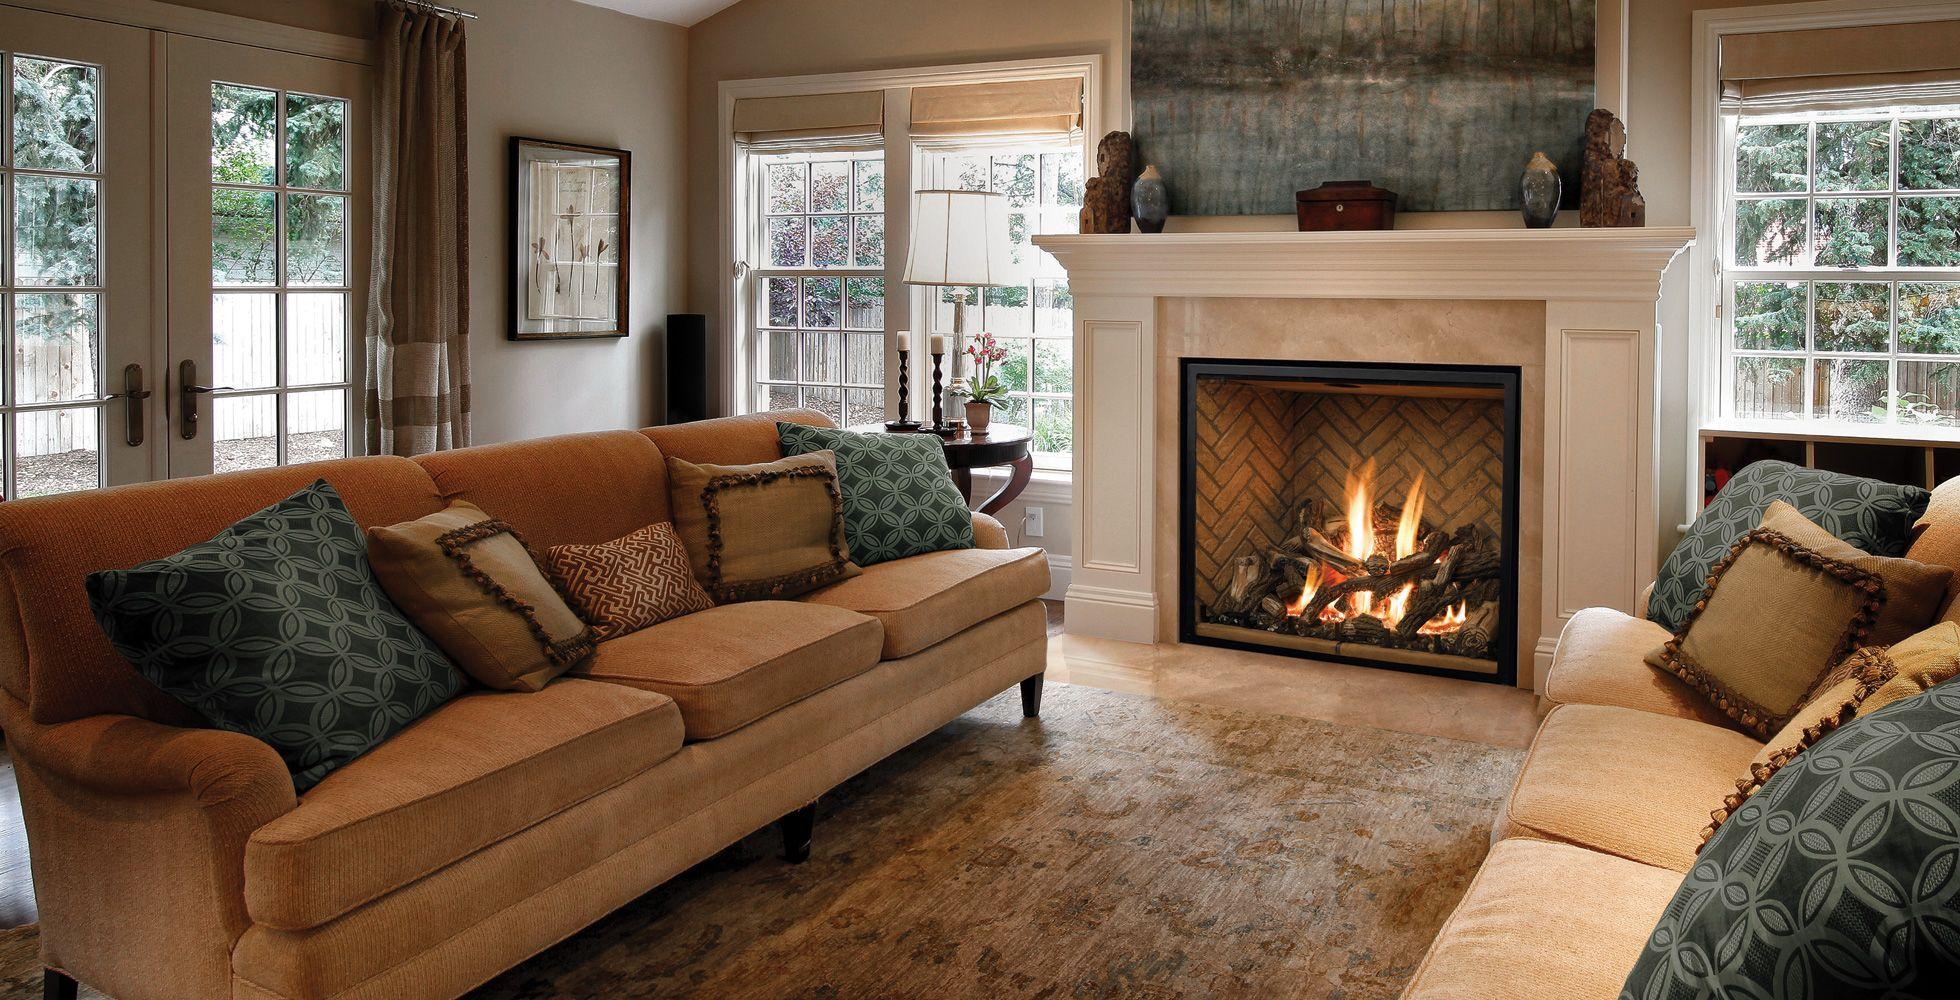 4K Fireplaces Wallpaper High Quality